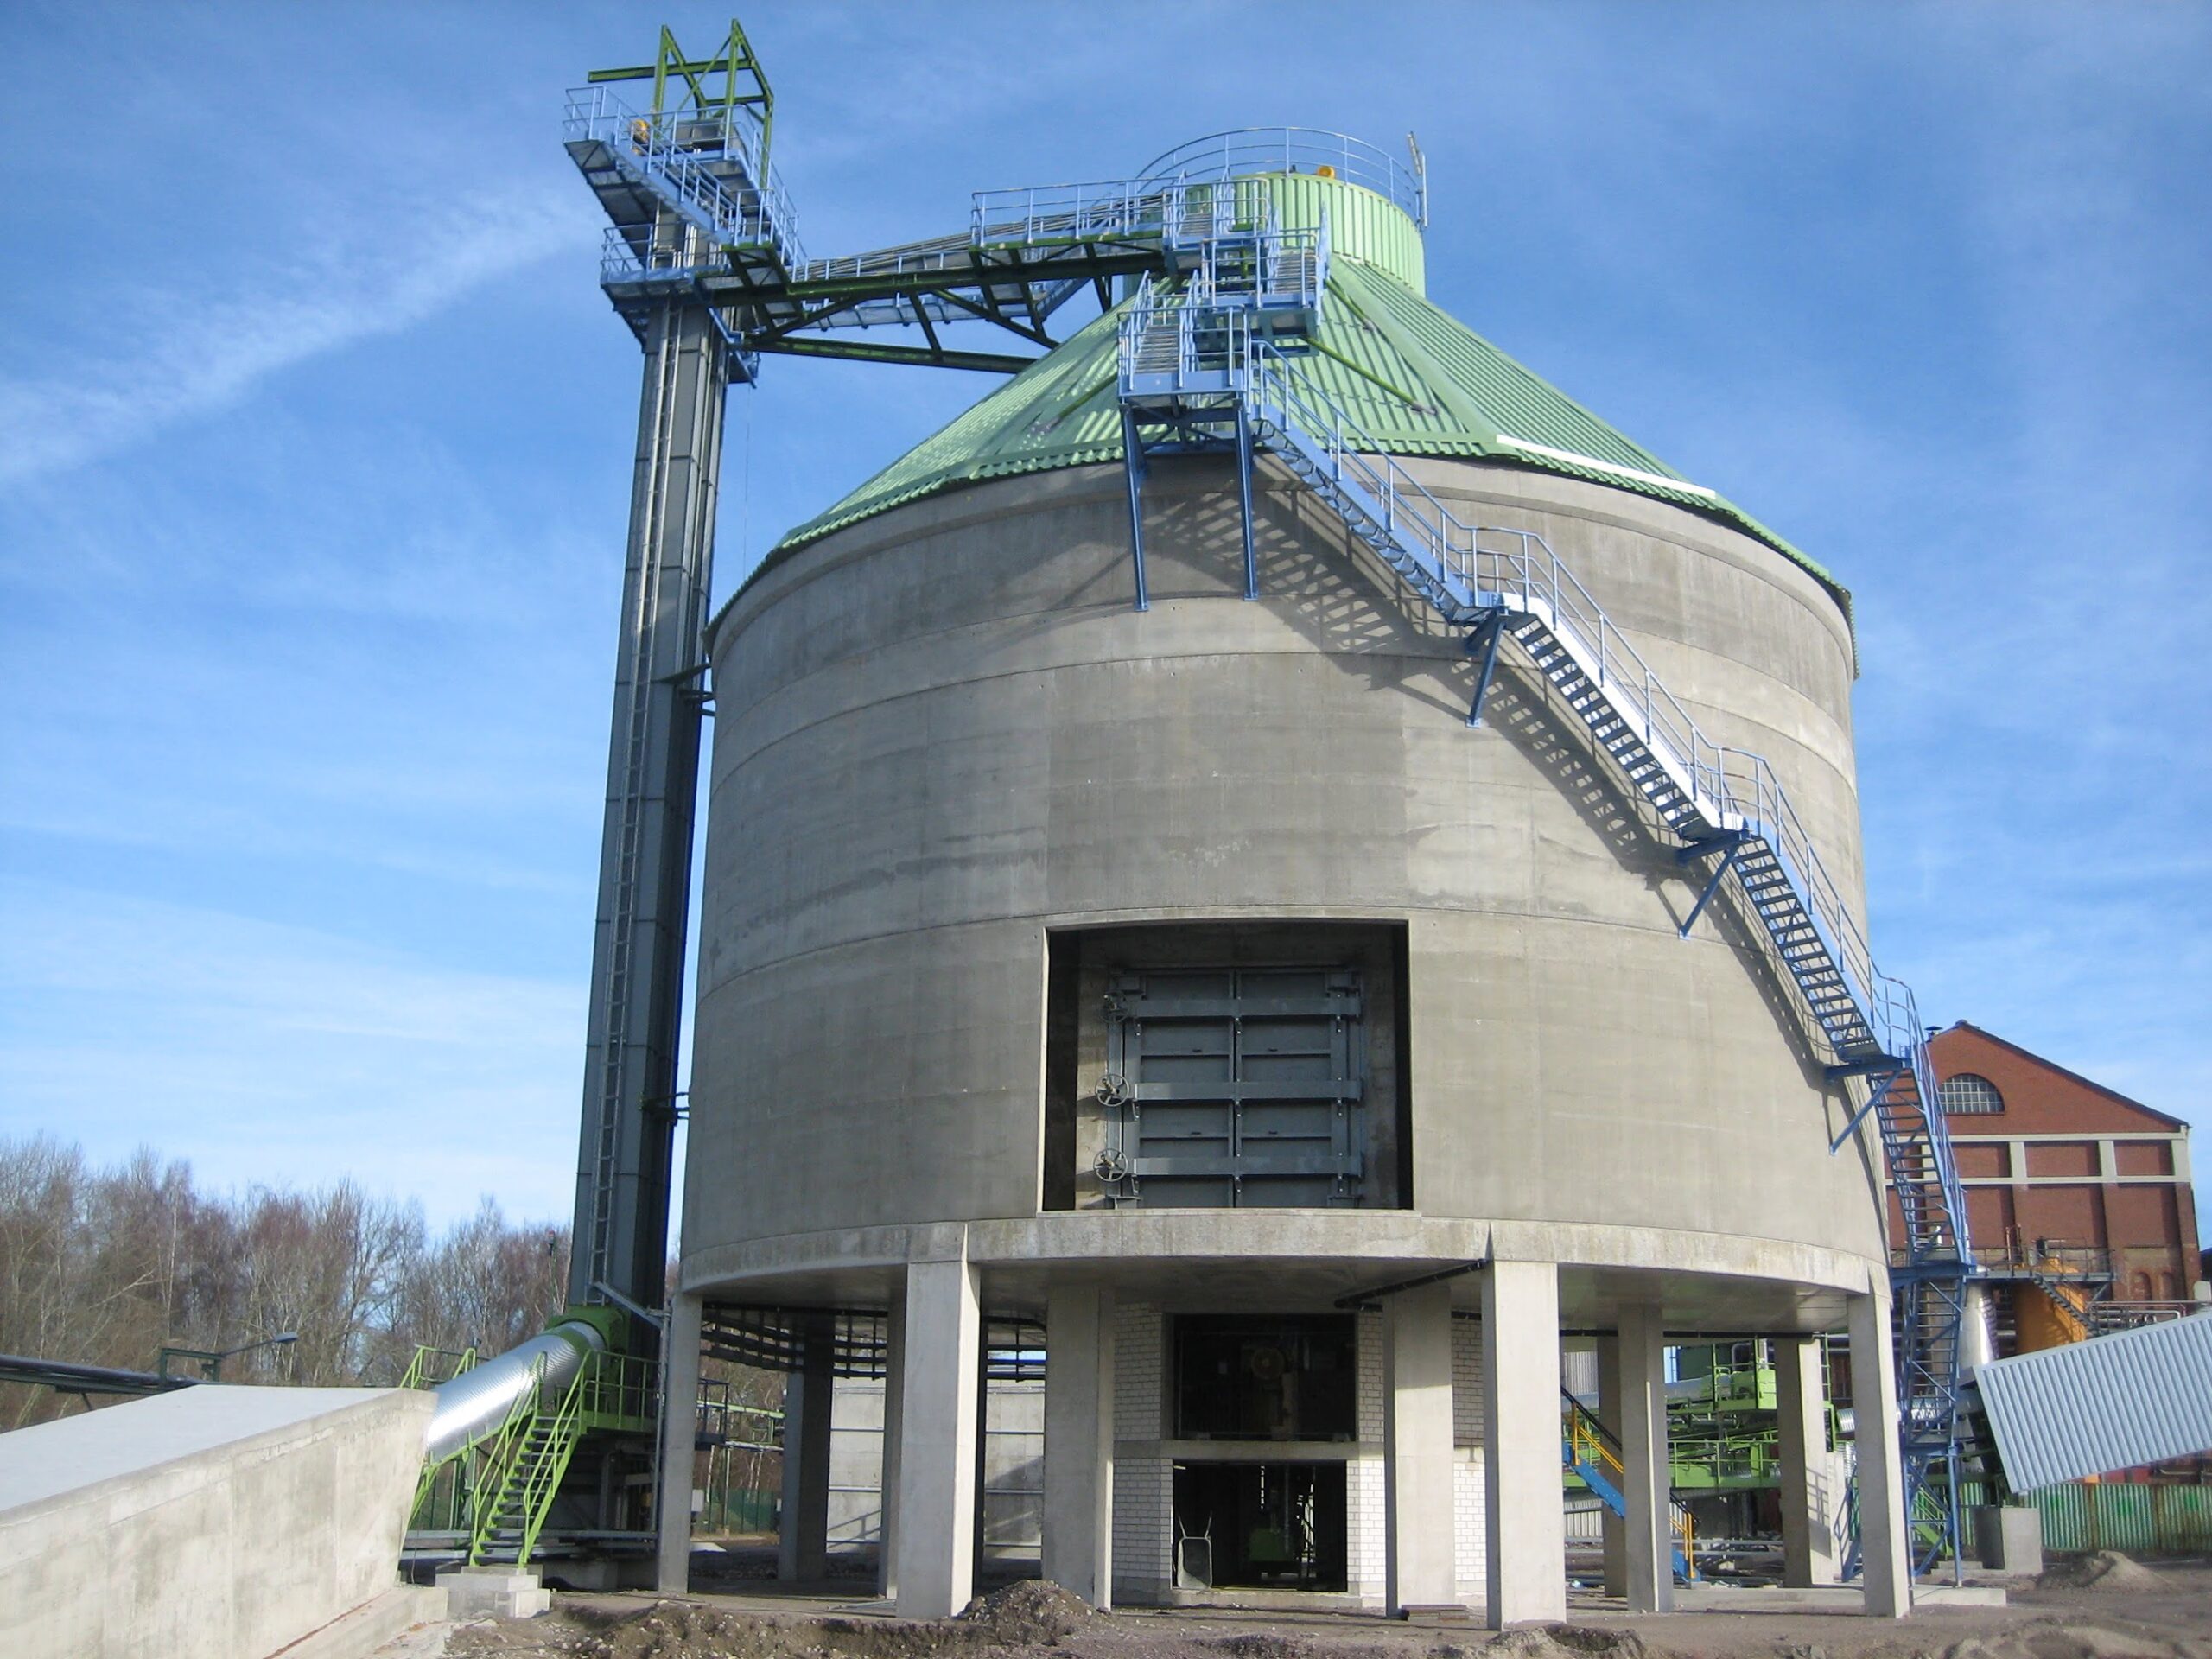 View on a wood chip silo